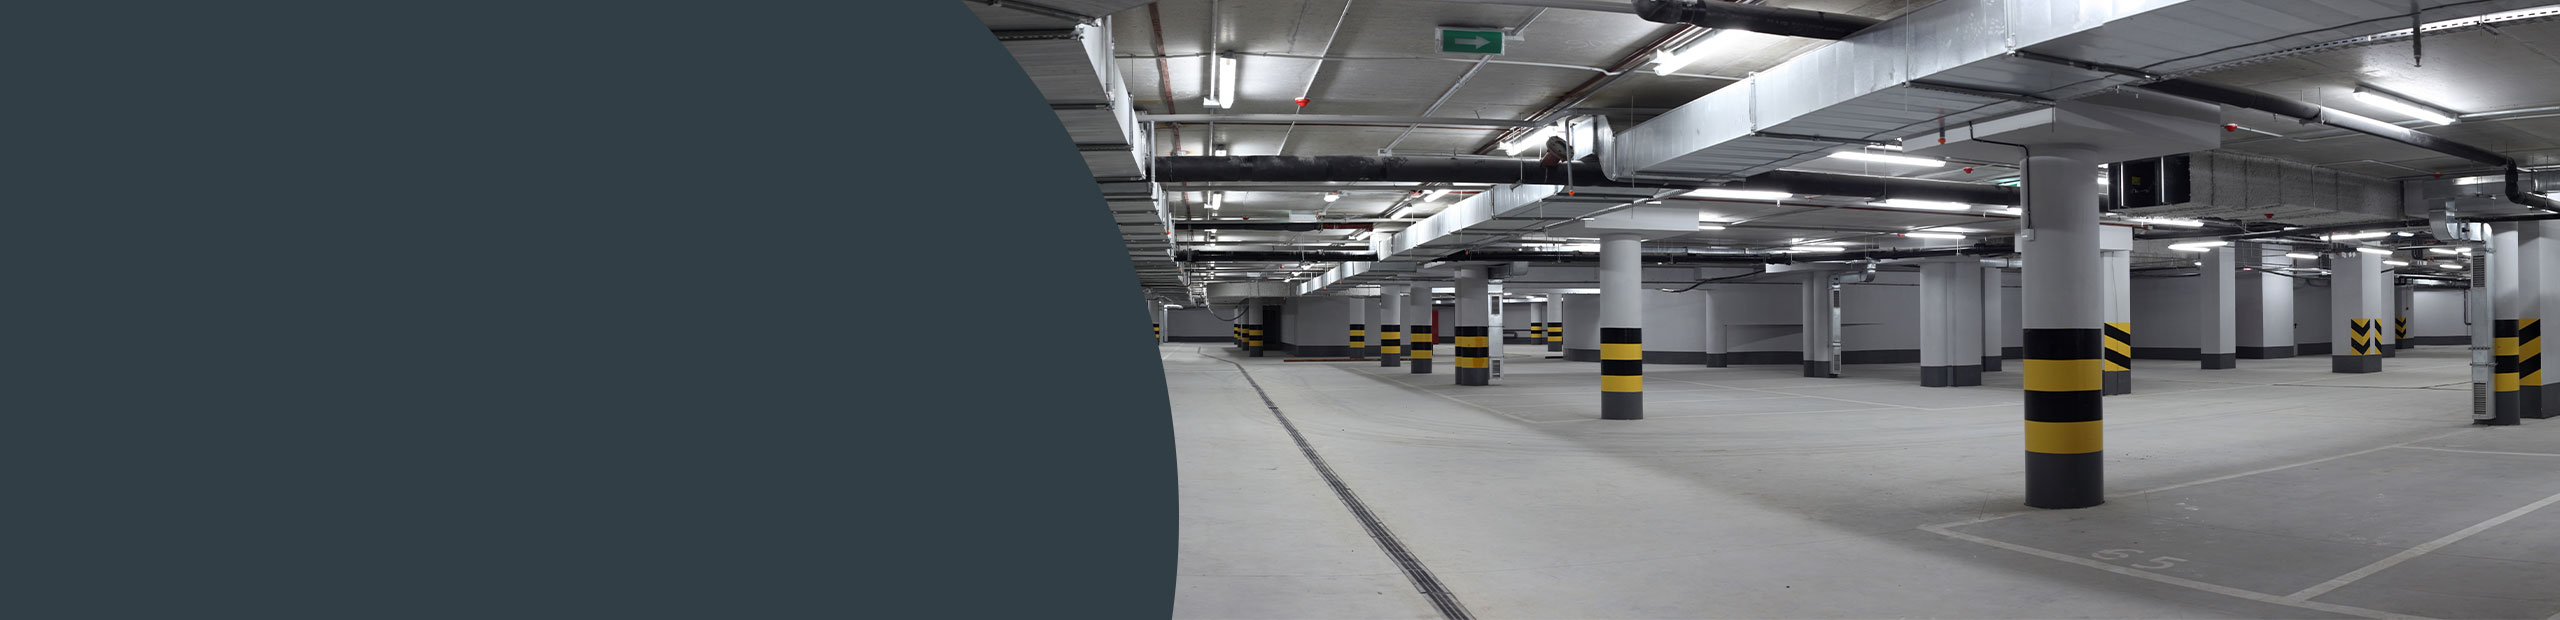 Car Park Cleaning Services - Ealing 